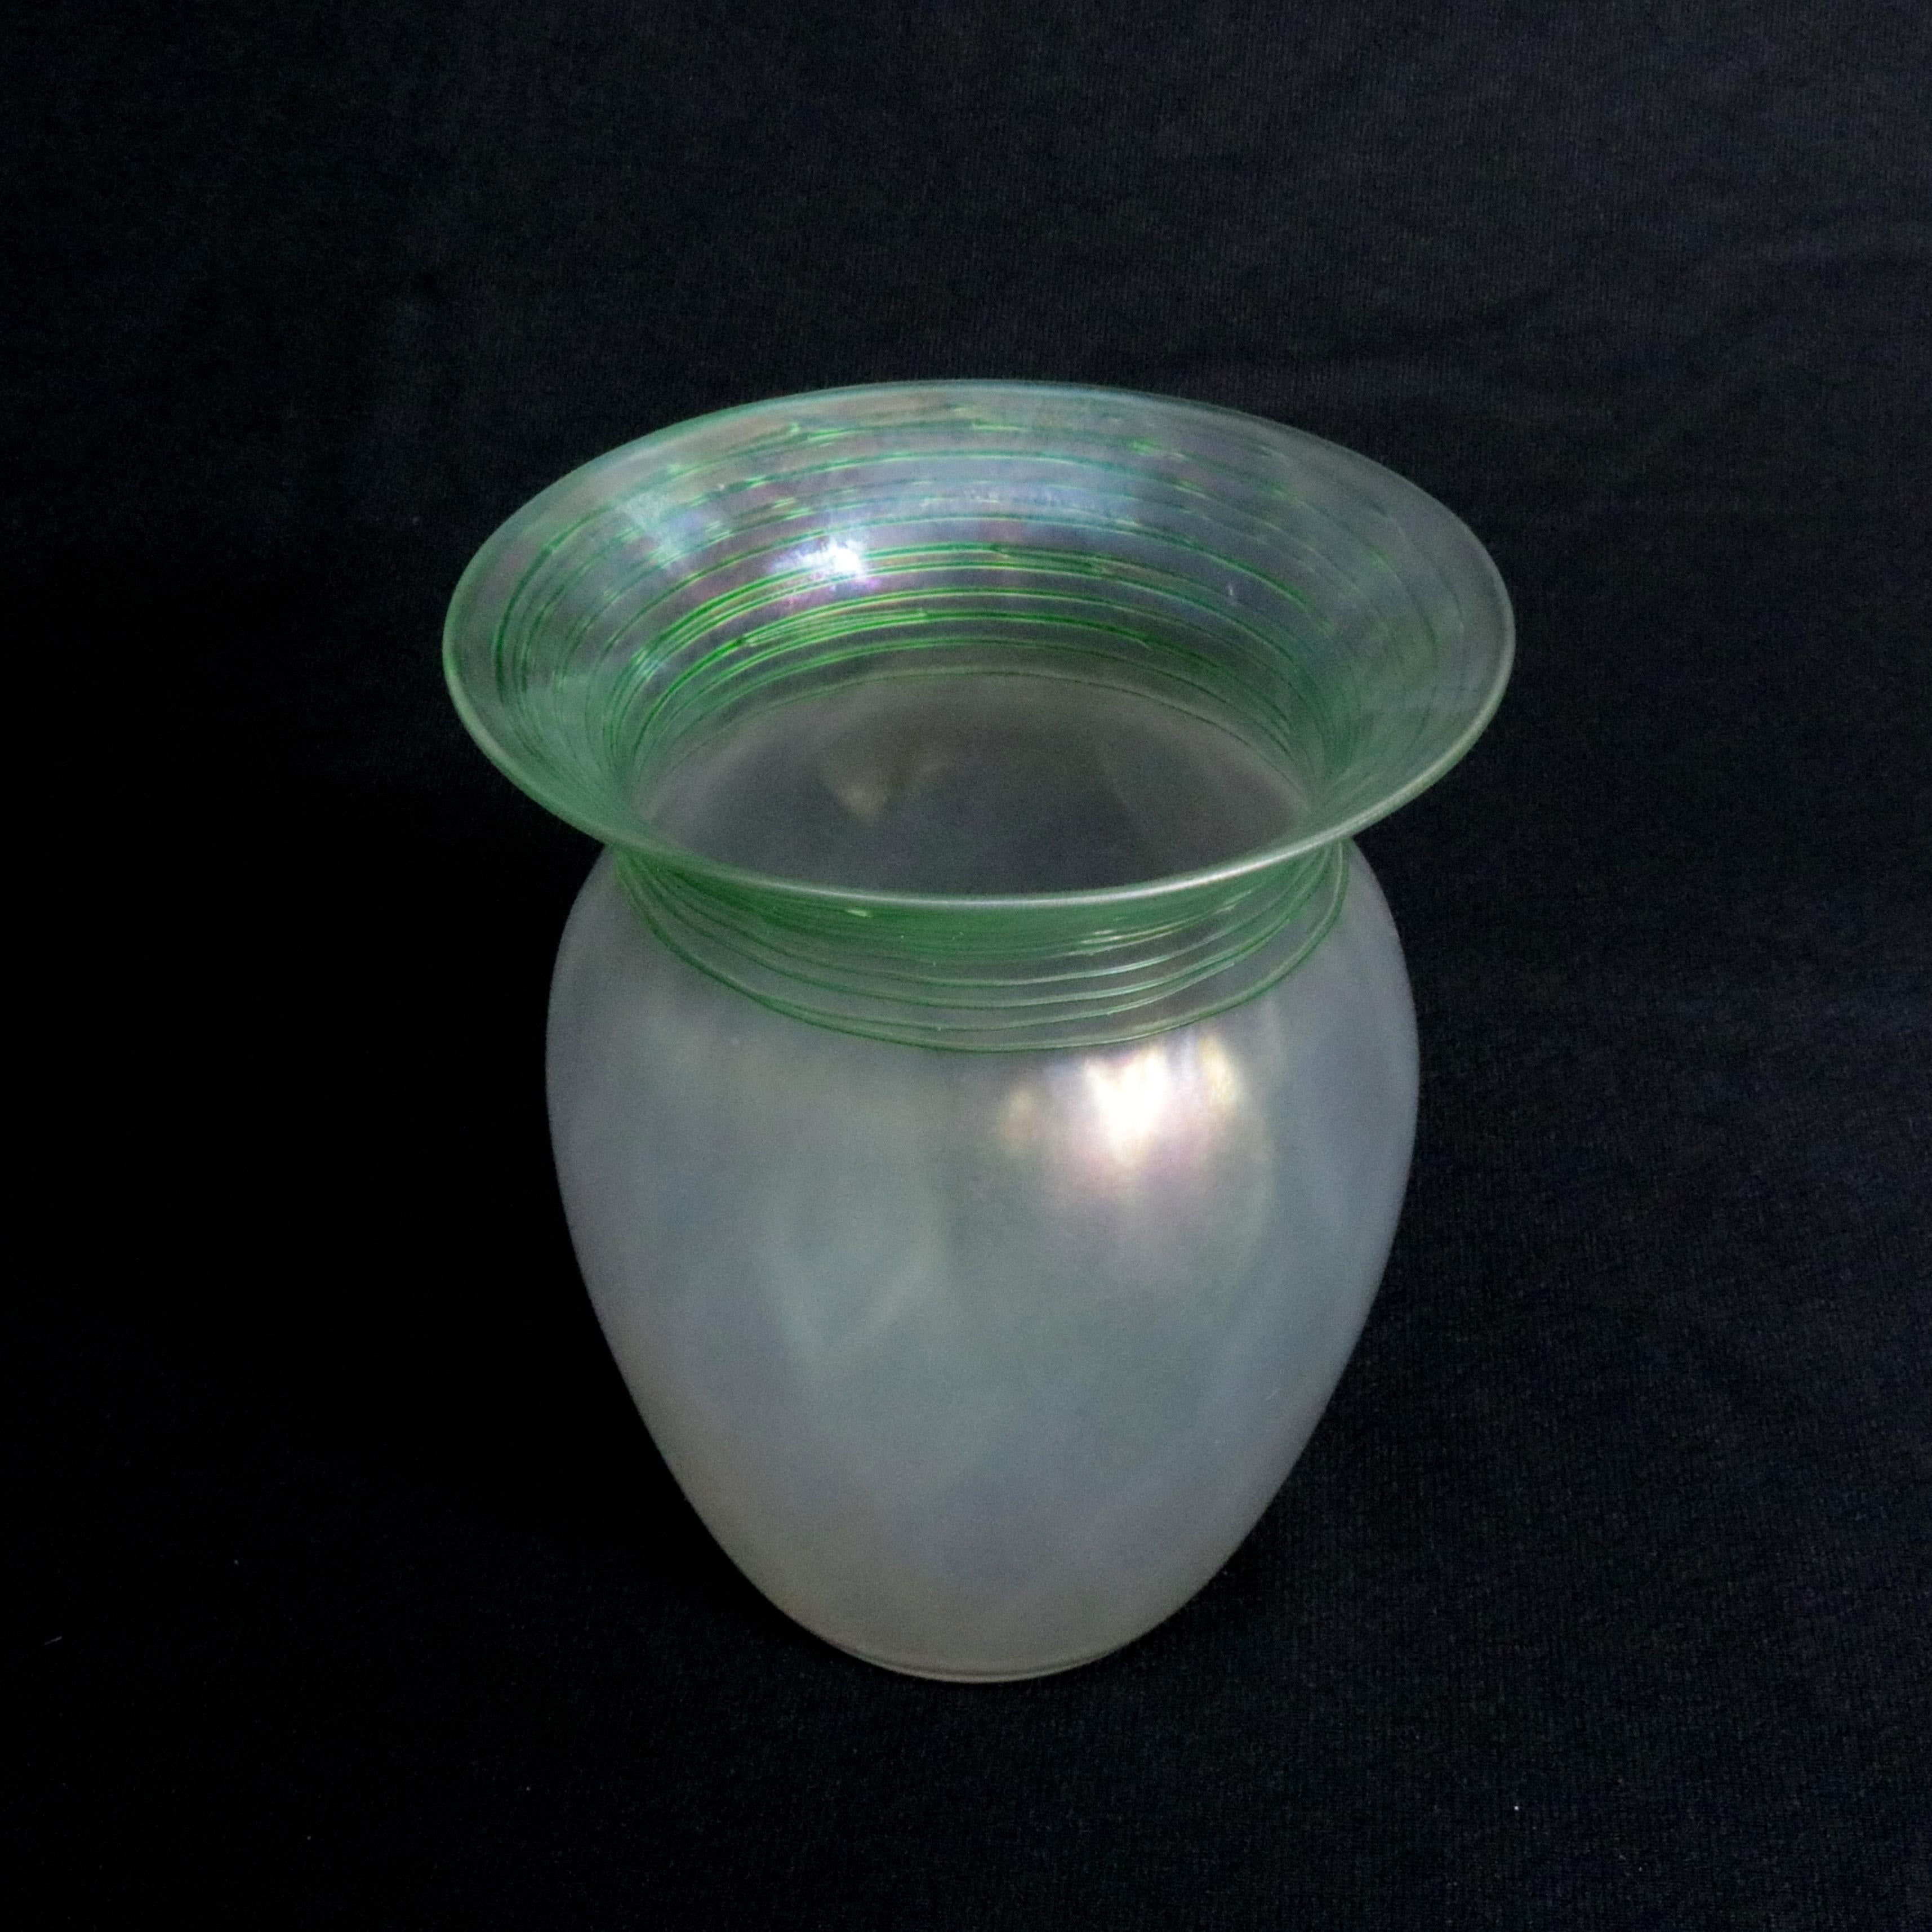 An antique vase by Steuben offers baluster shape in Verre de Soie art glass having optic applied green threading around flared neck with wide opening surmounting paneled vessel, polished pontil, signed with acid etched Steuben as photographed, early